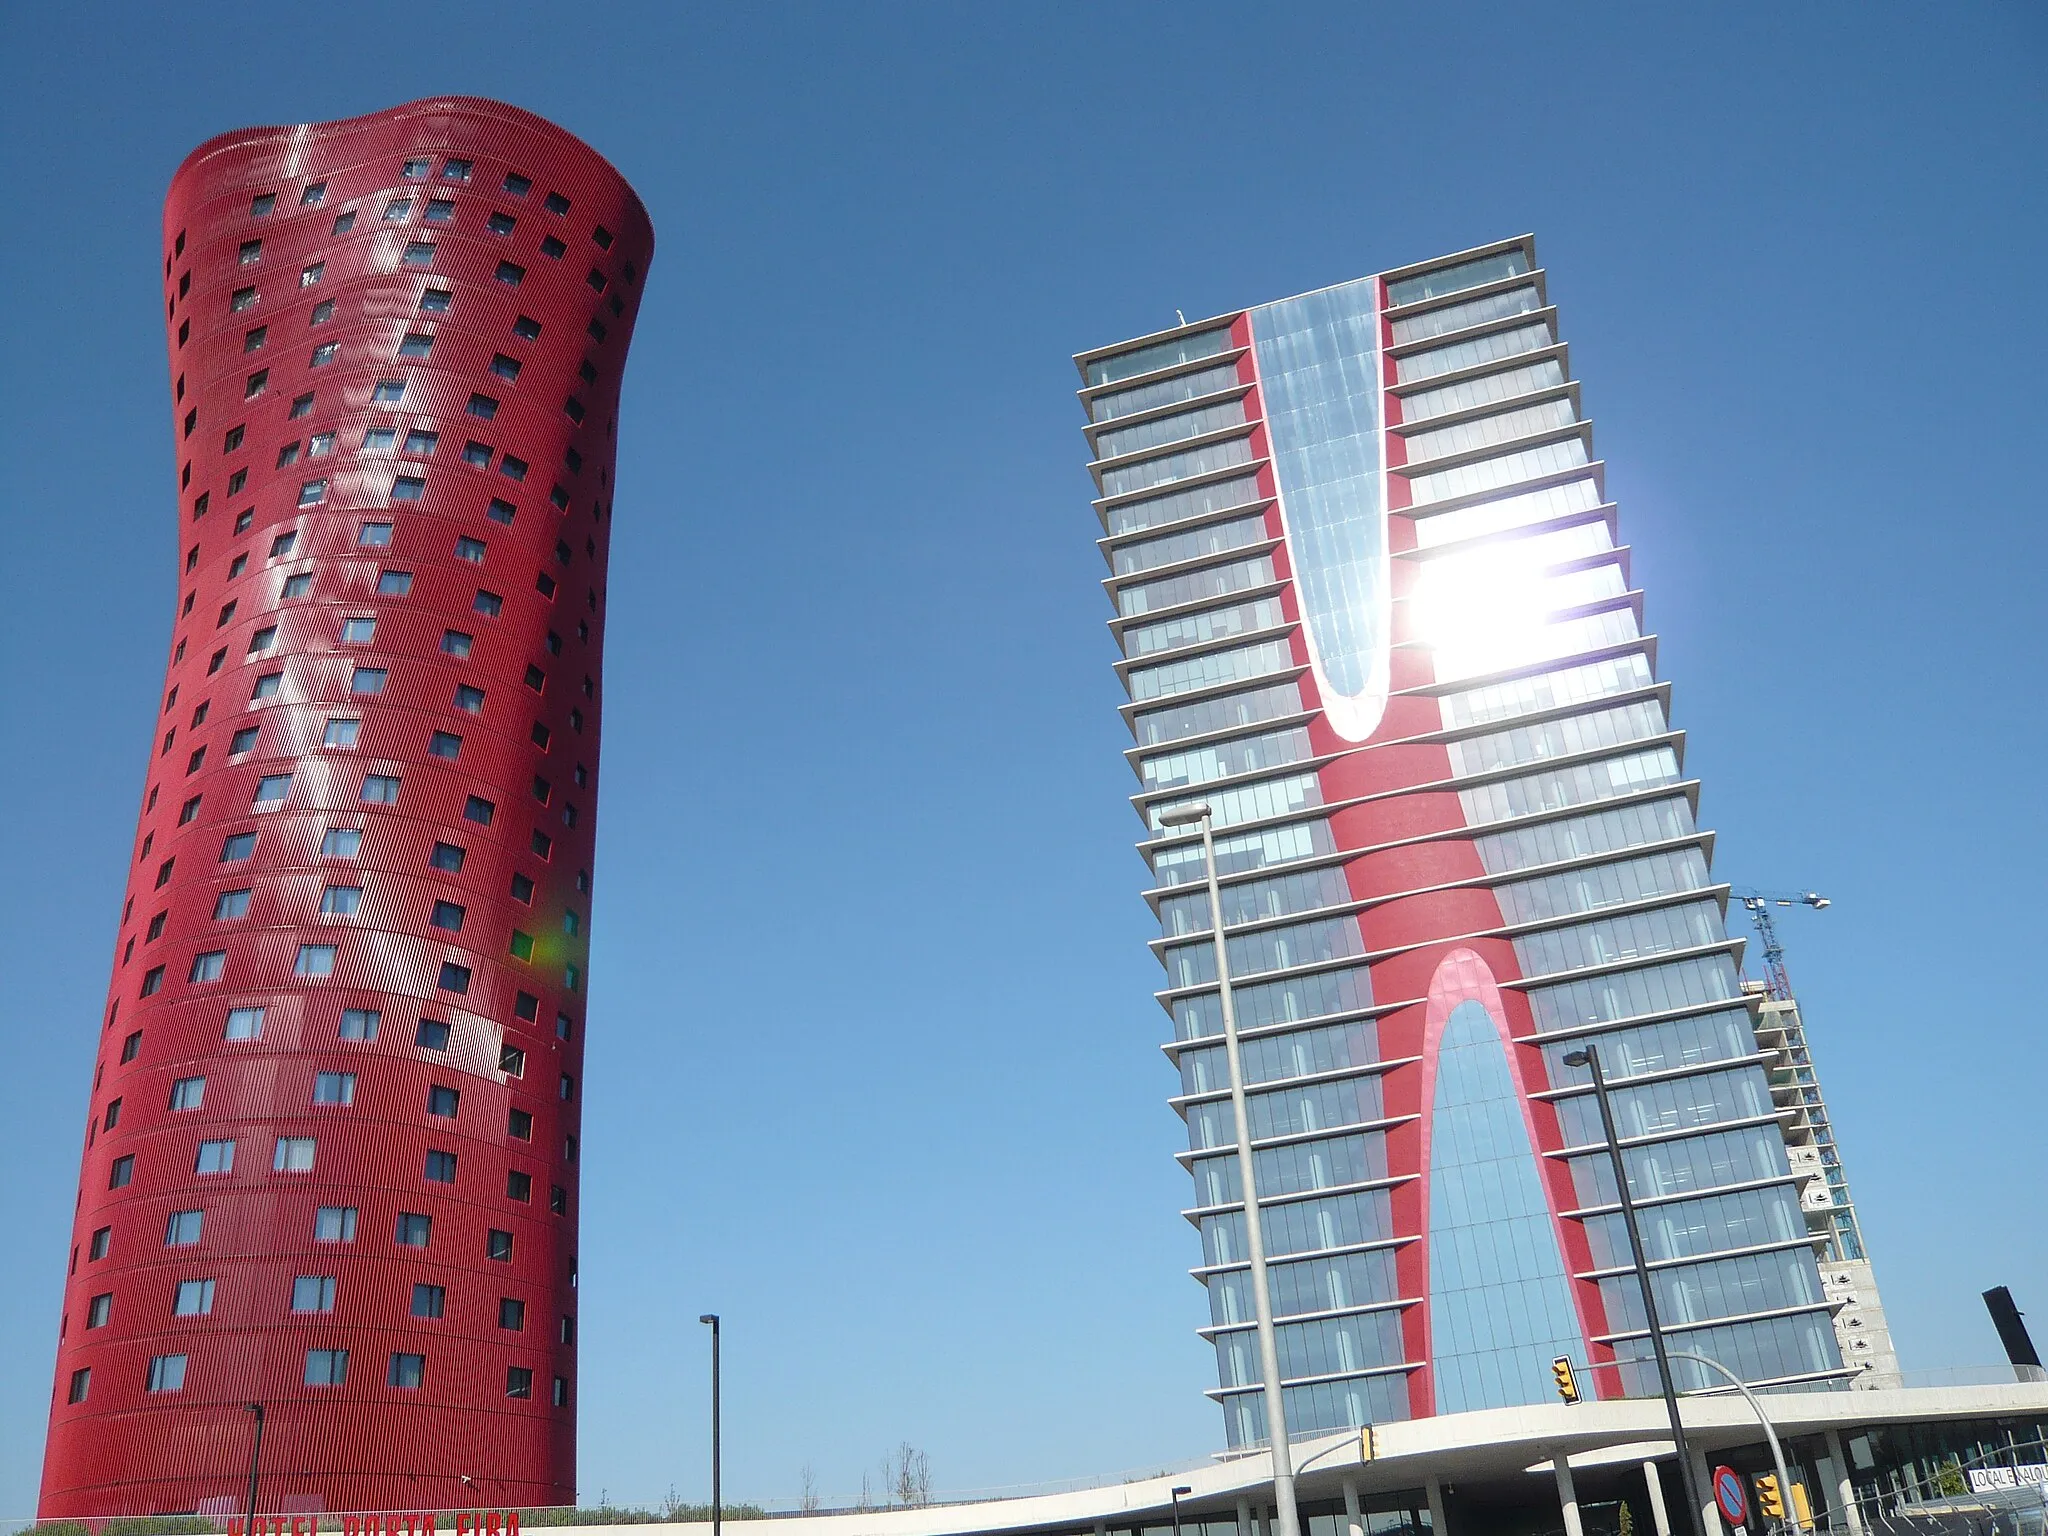 Photo showing: Toyo Ito Towers, L'Hospitalet de Llobregat, Plaza Europa. They are located at the entrance of the "Gran Via" center of Fira de Barcelona